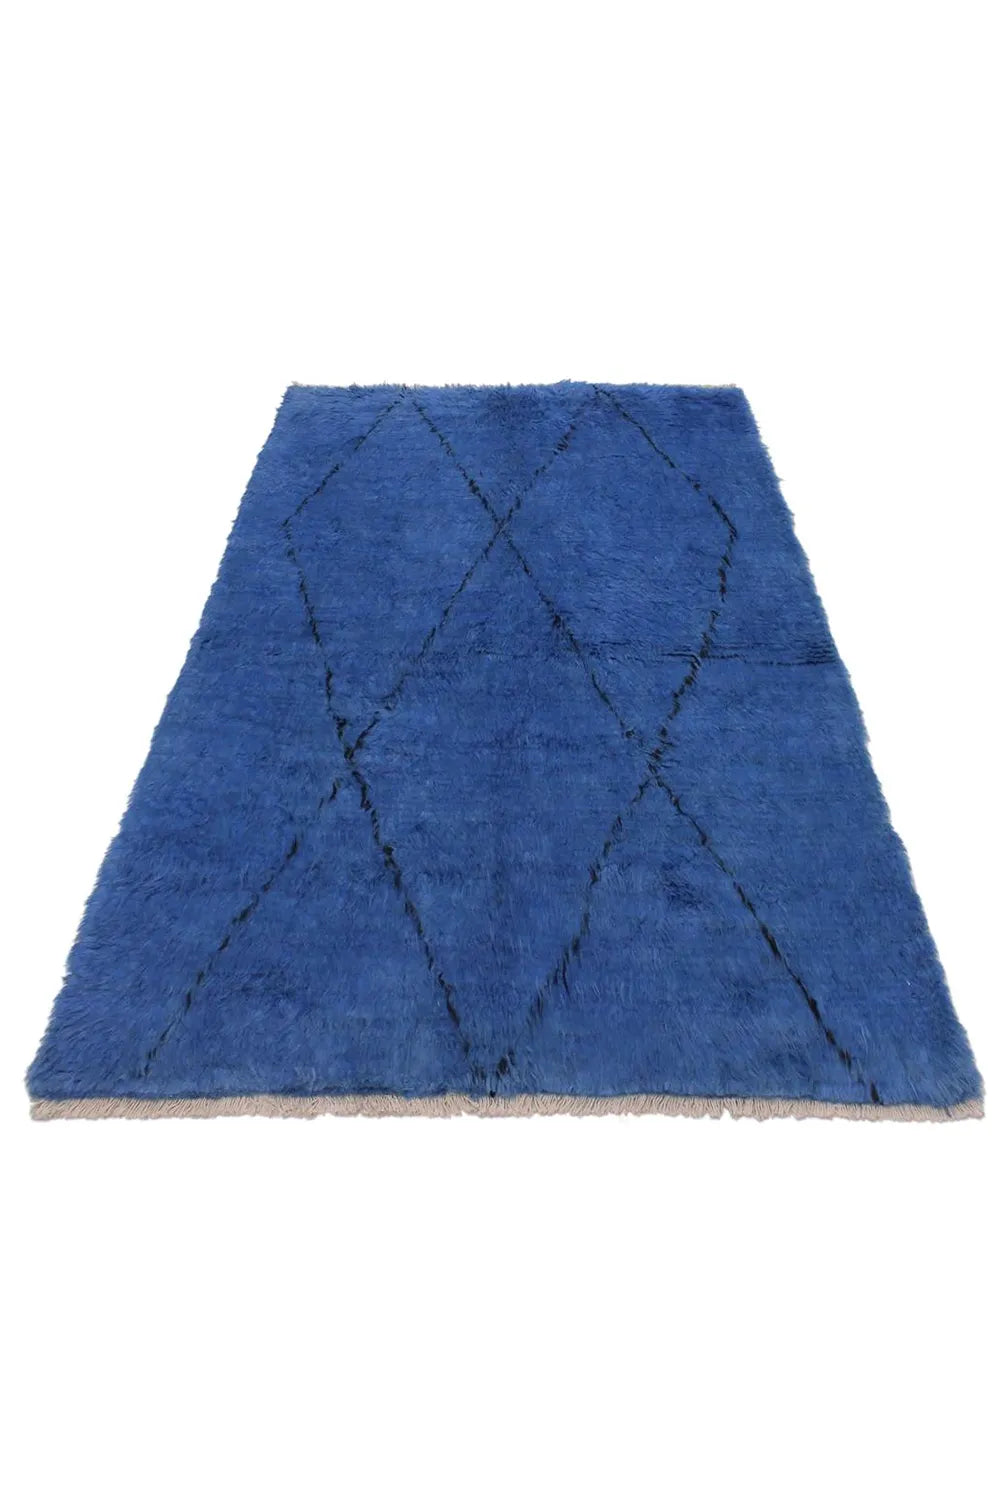 Geometric Pattern Large Blue Wool Rug in Grand 10x14 Size - Statement Piece for Spacious Rooms